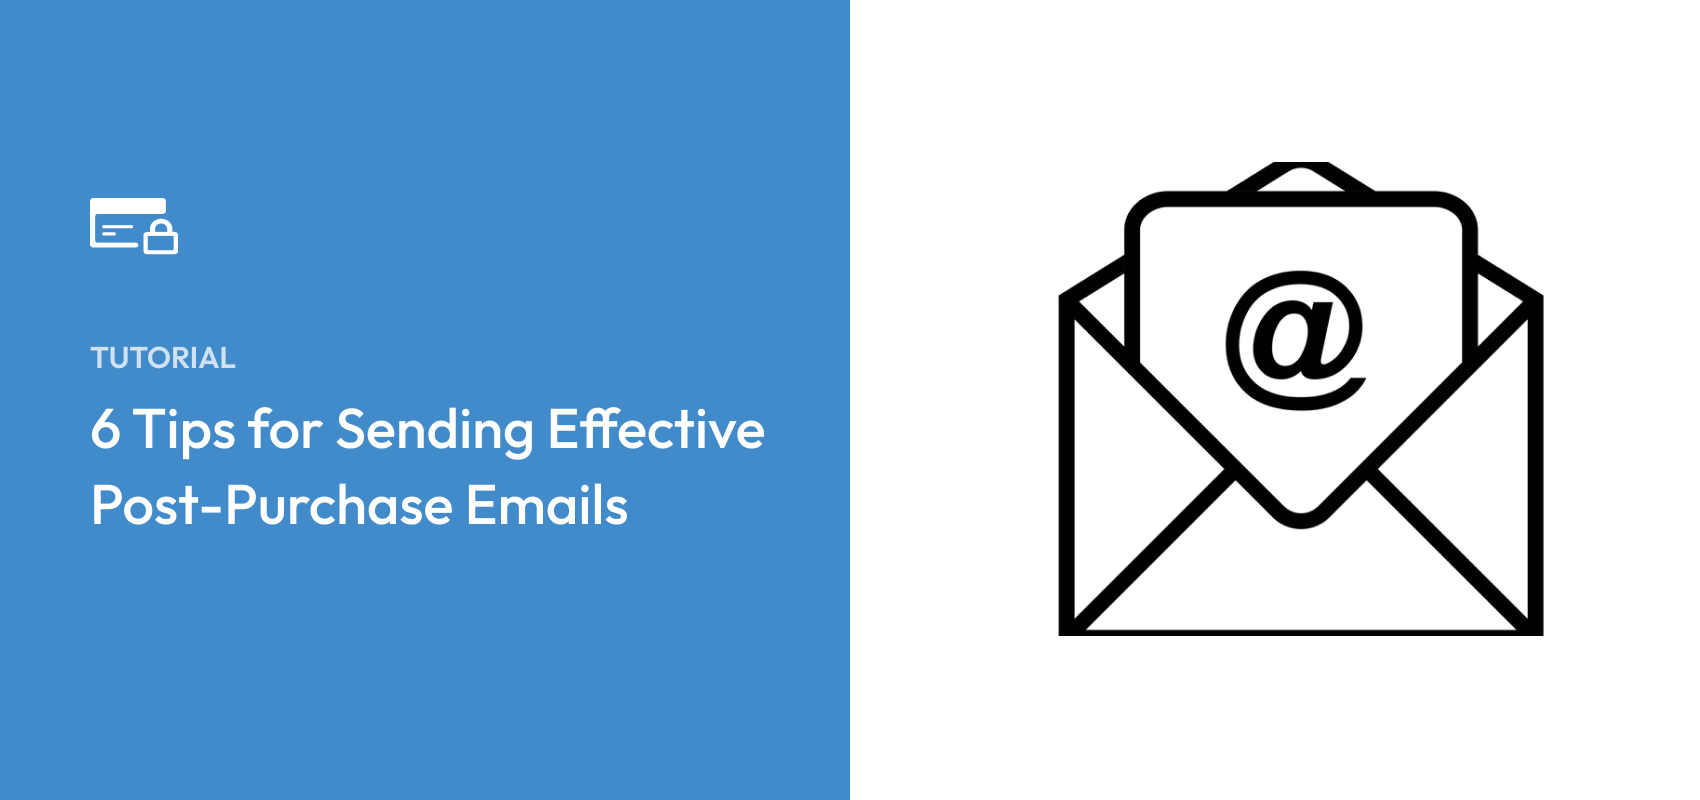 6 Tips for Sending Effective Post-Purchase Emails